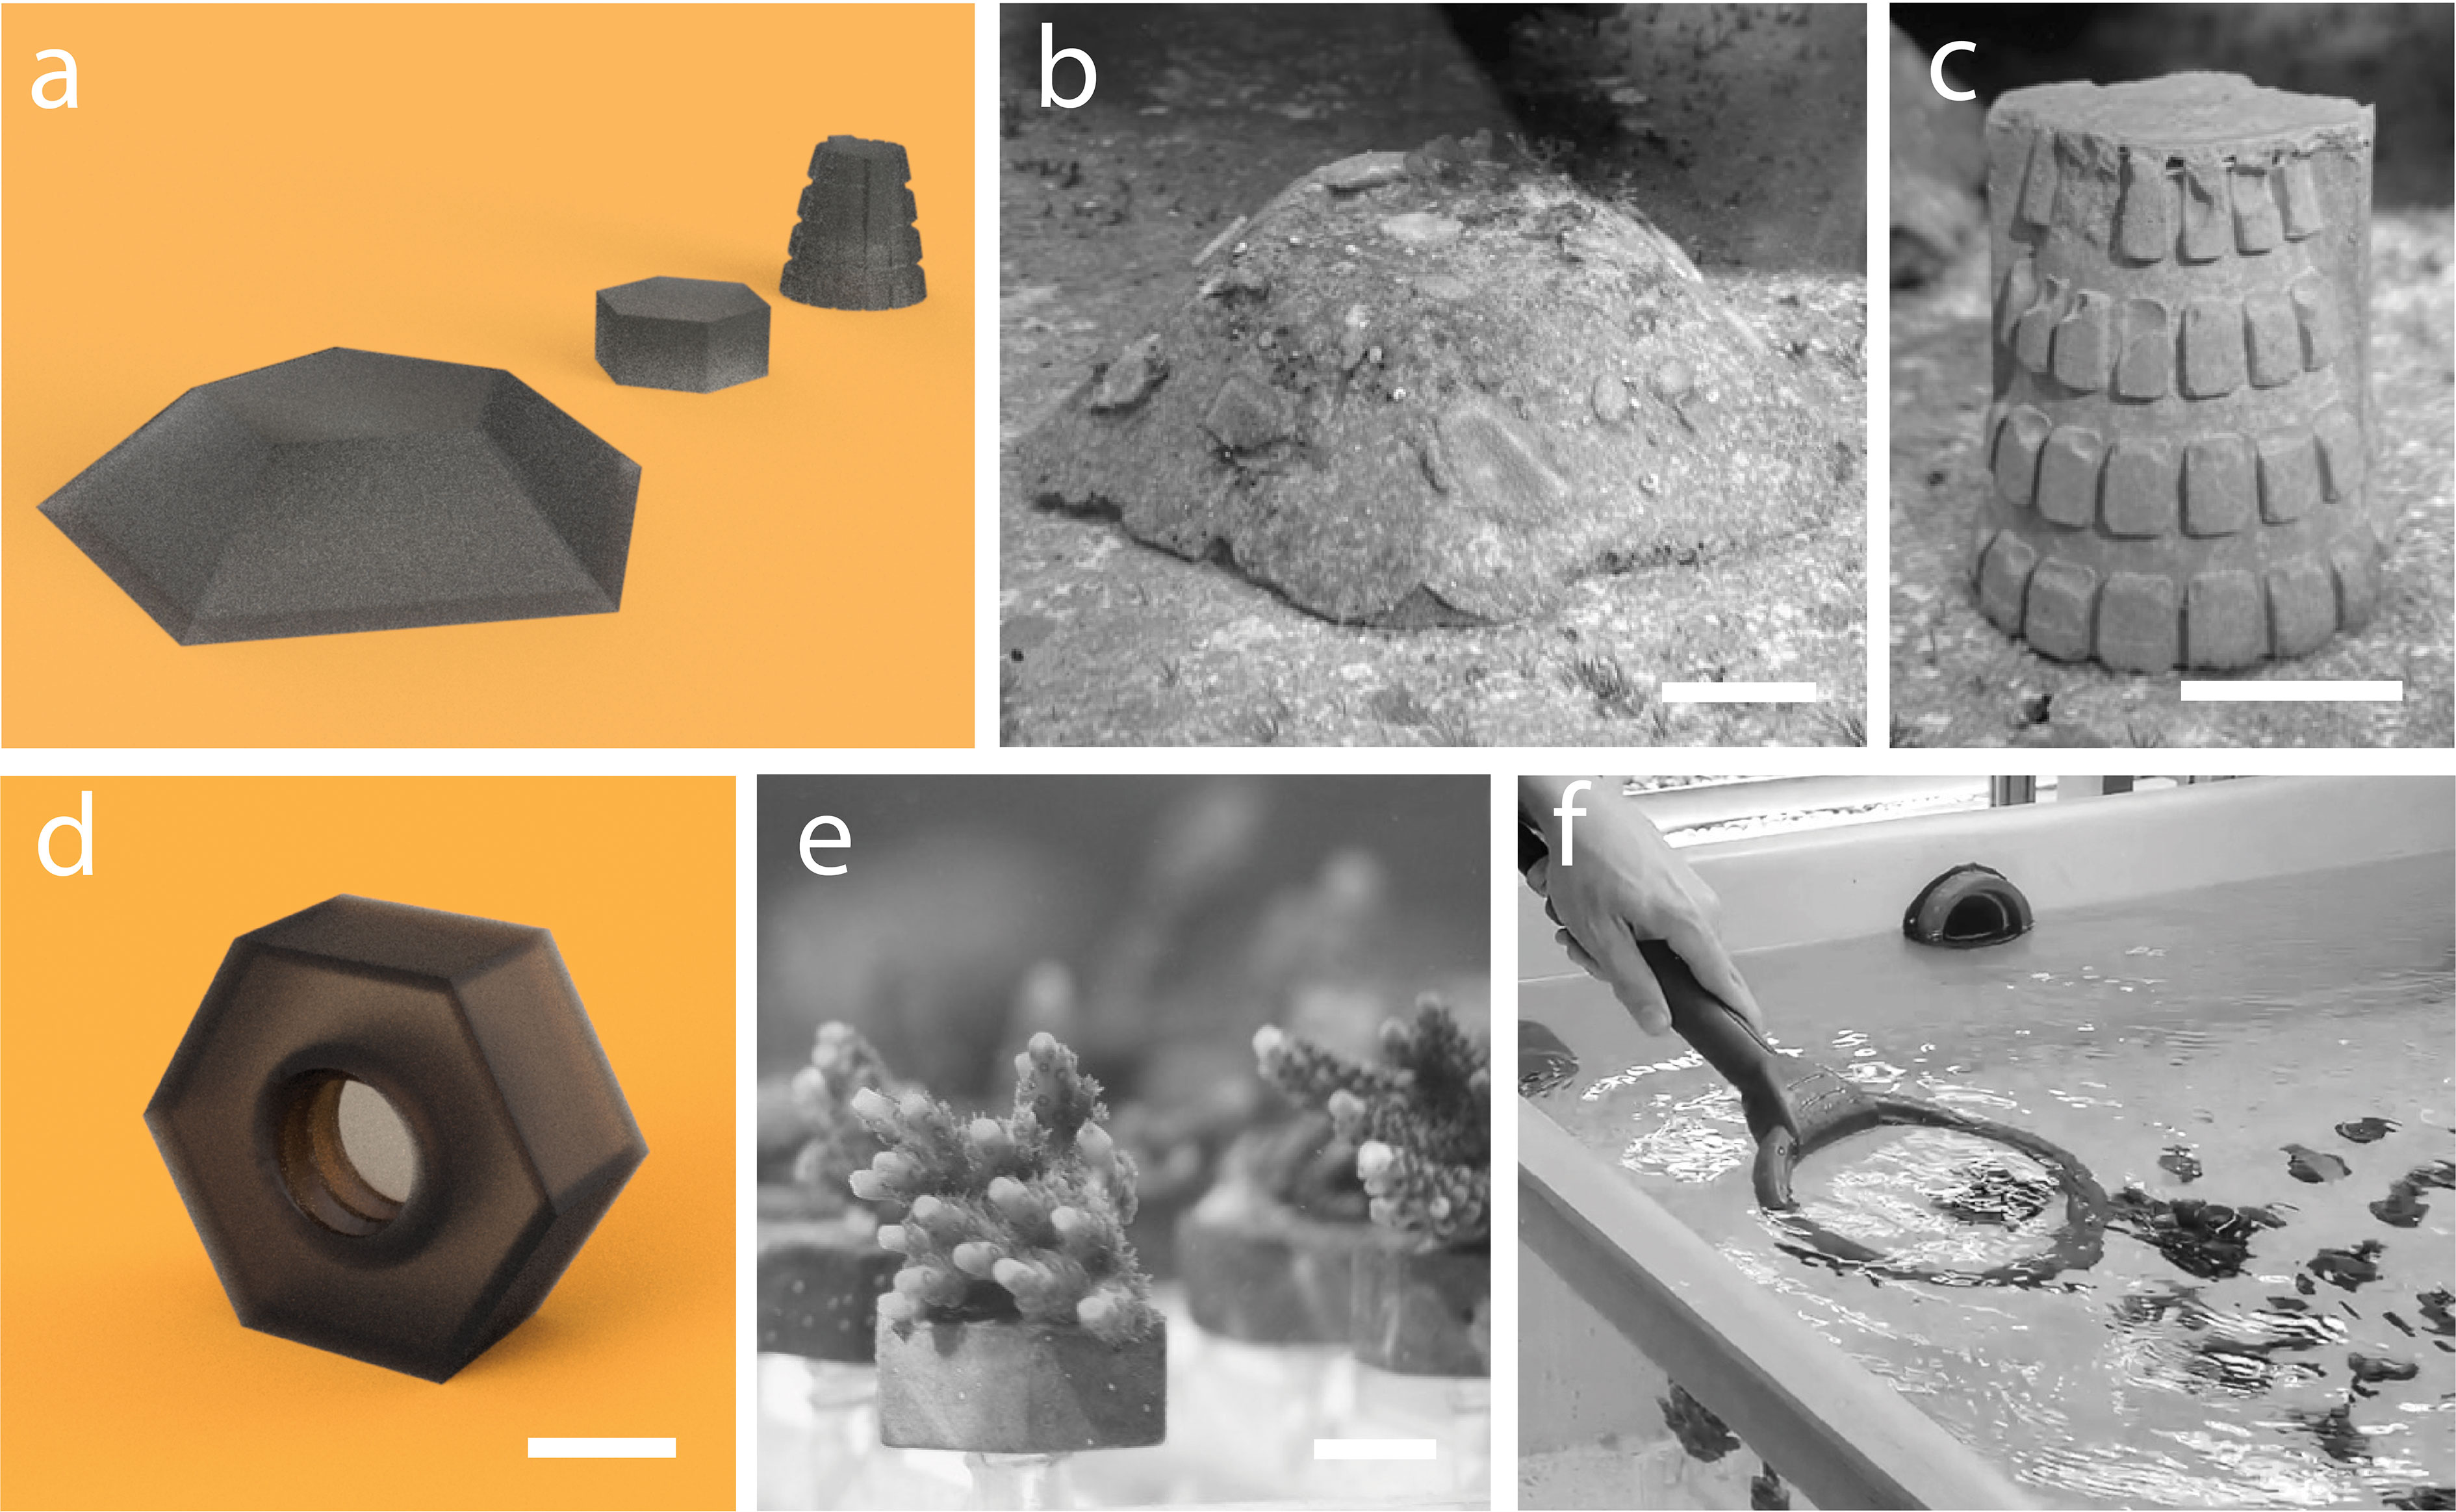 Rethinking Artificial Reef Structures through 3D Clay Printing